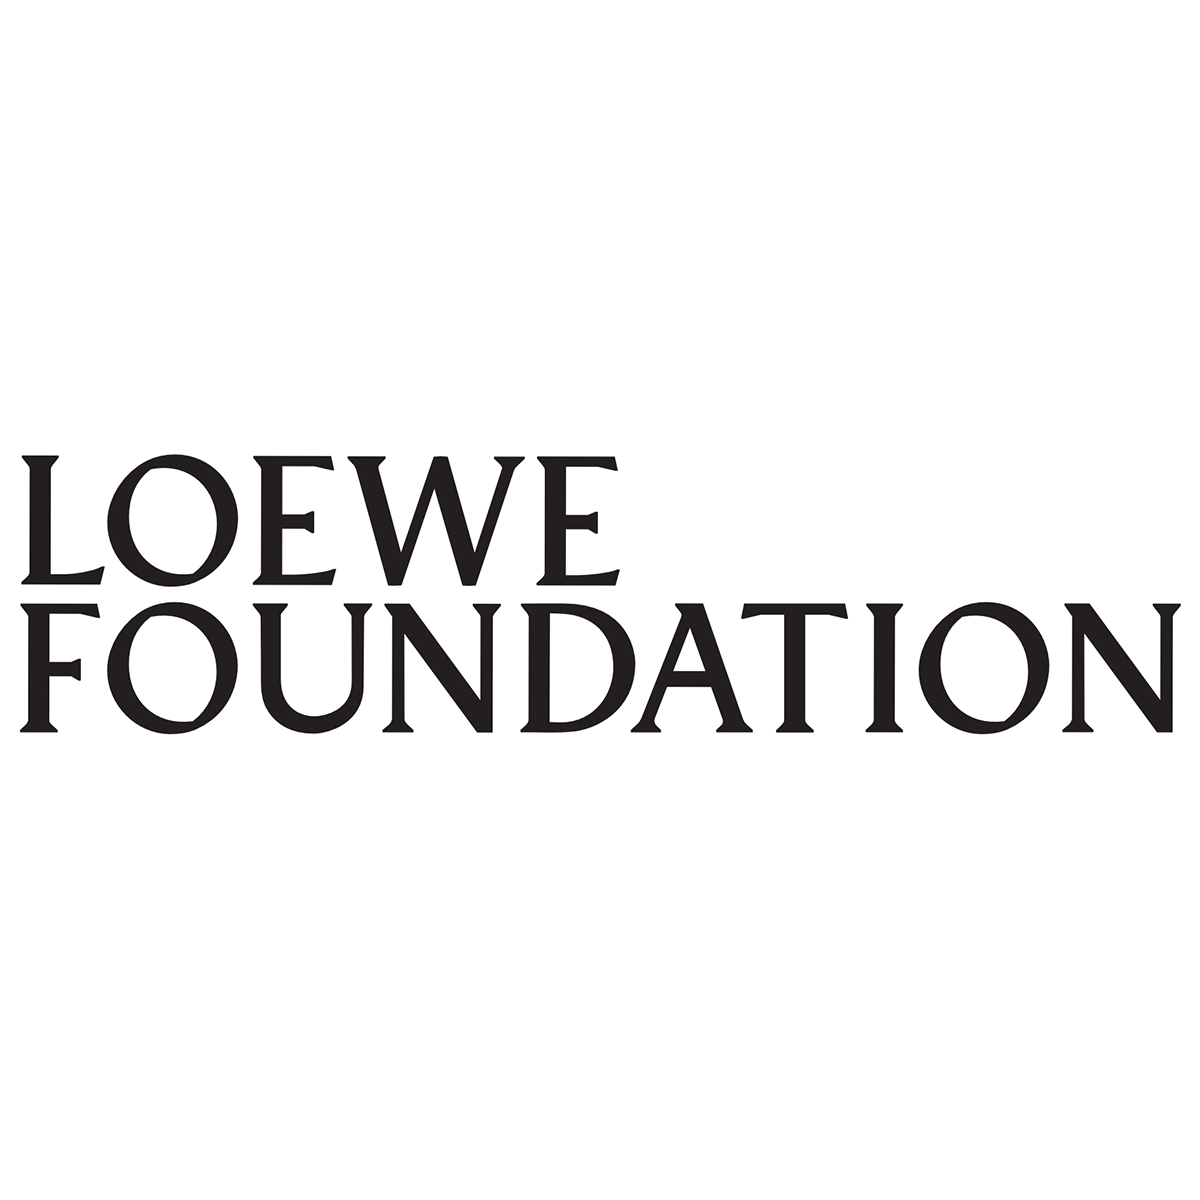 Sponsored by the LOEWE FOUNDATION